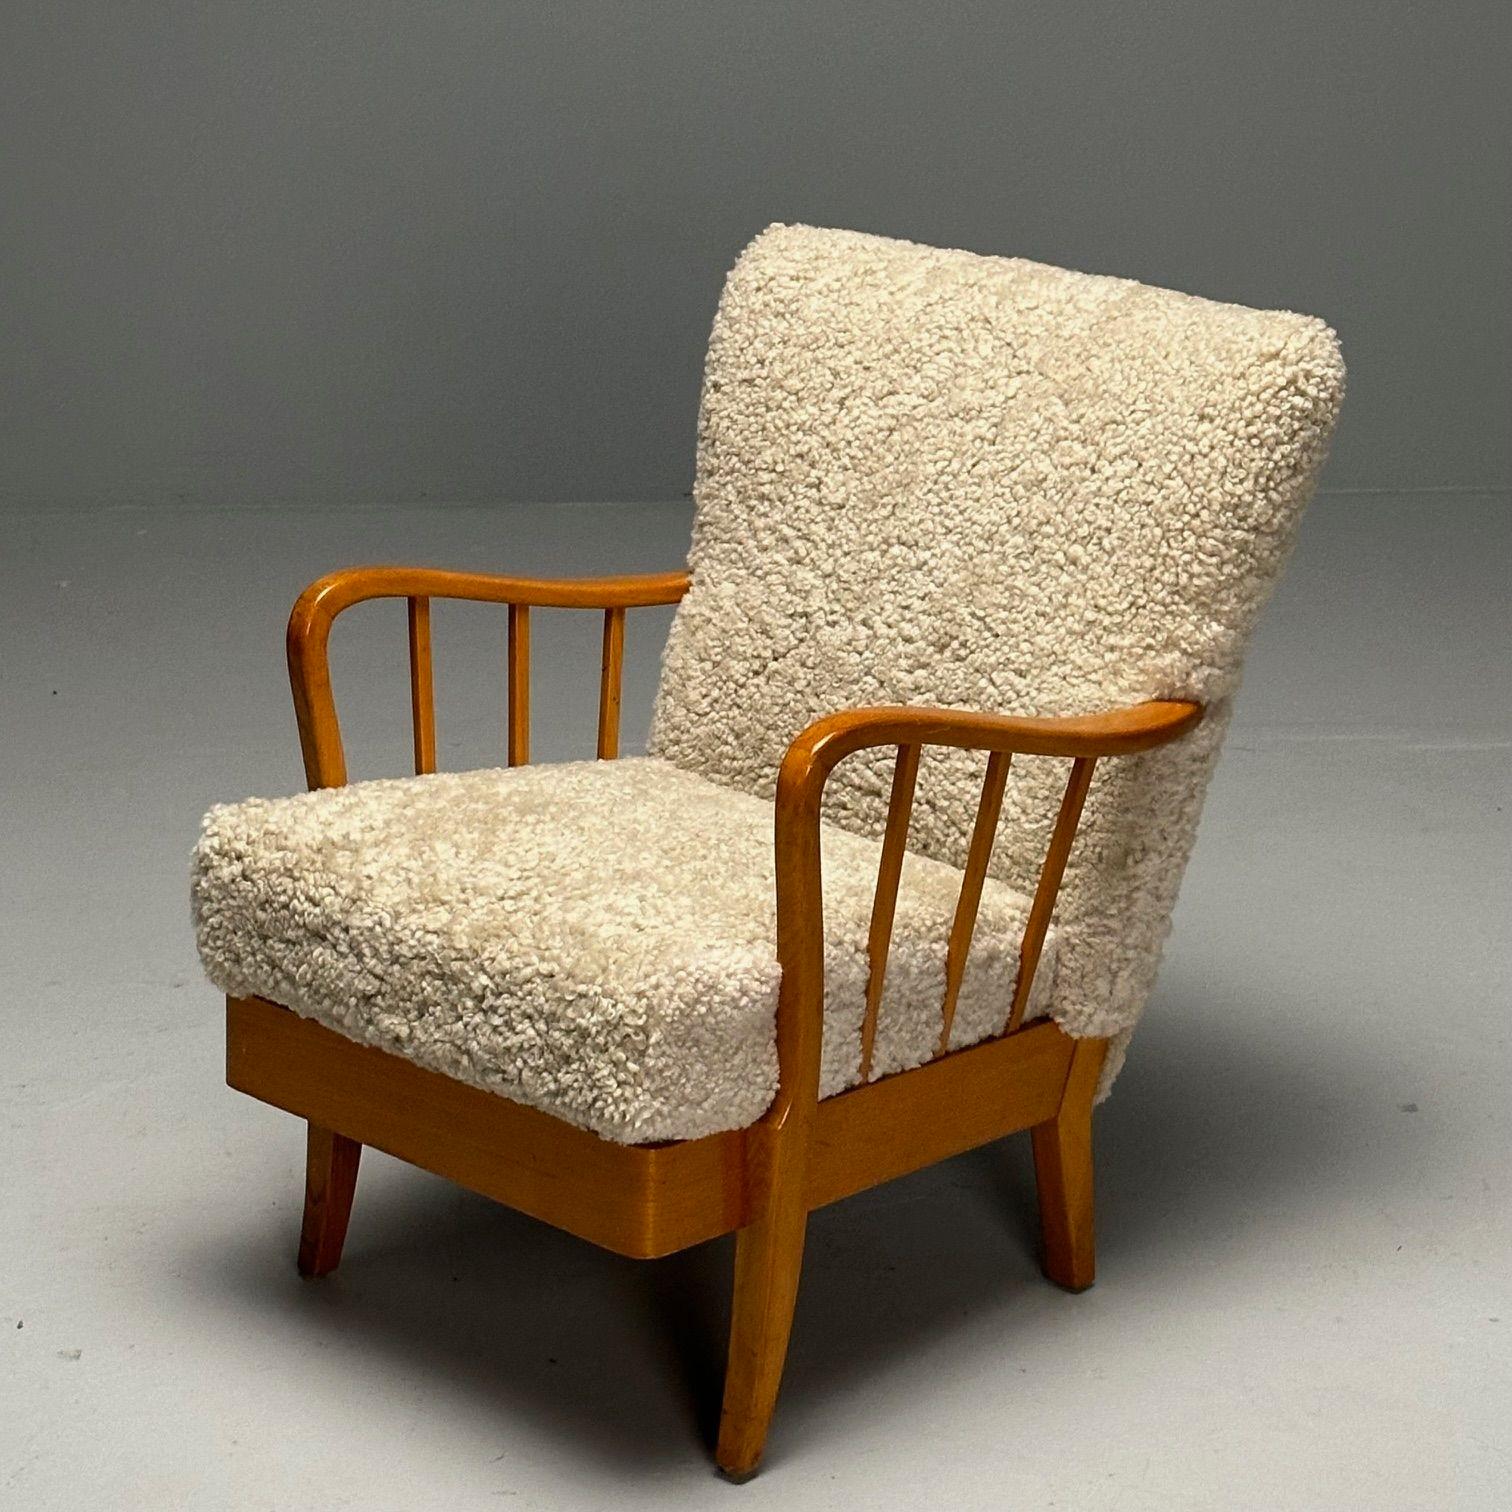 Alfred Christensen Style, Swedish Mid-Century Modern Arm Chair, Shearling, Beech
 
Lounge chair designed and produced in Denmark circa 1950s. The backrest and the seat are upholstered in light beige, genuine curly shearling upholstery. The frame is